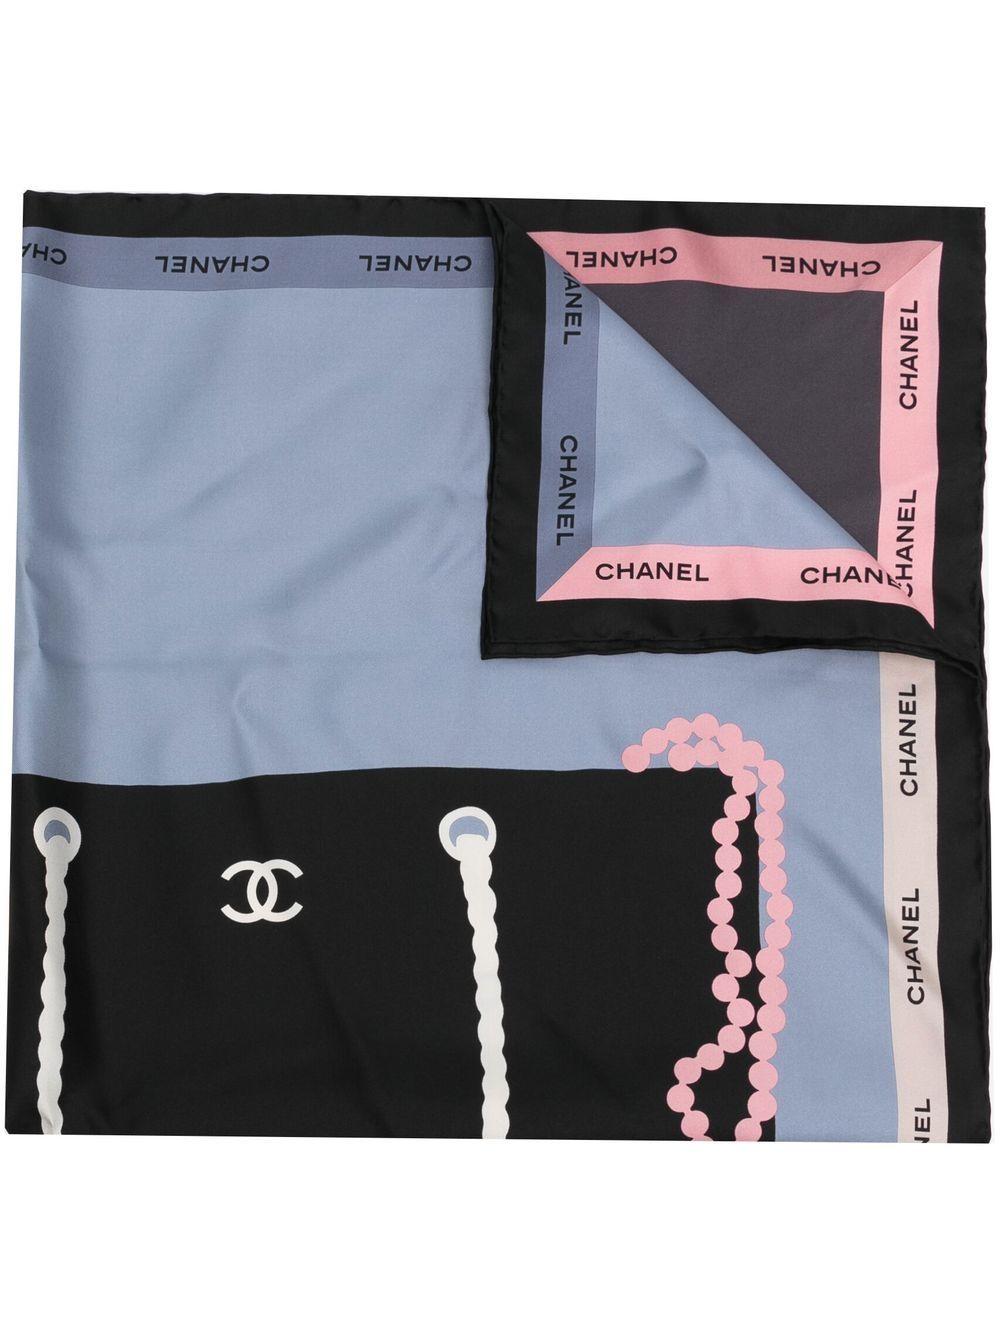 Designed with a large handbag motif, representing Chanel's iconic bags, this pre-owned silk scarf has been designed in the shades of black, white, blue and red. Finished with a border of Chanel's famous logo, wear it around your neck or twisted